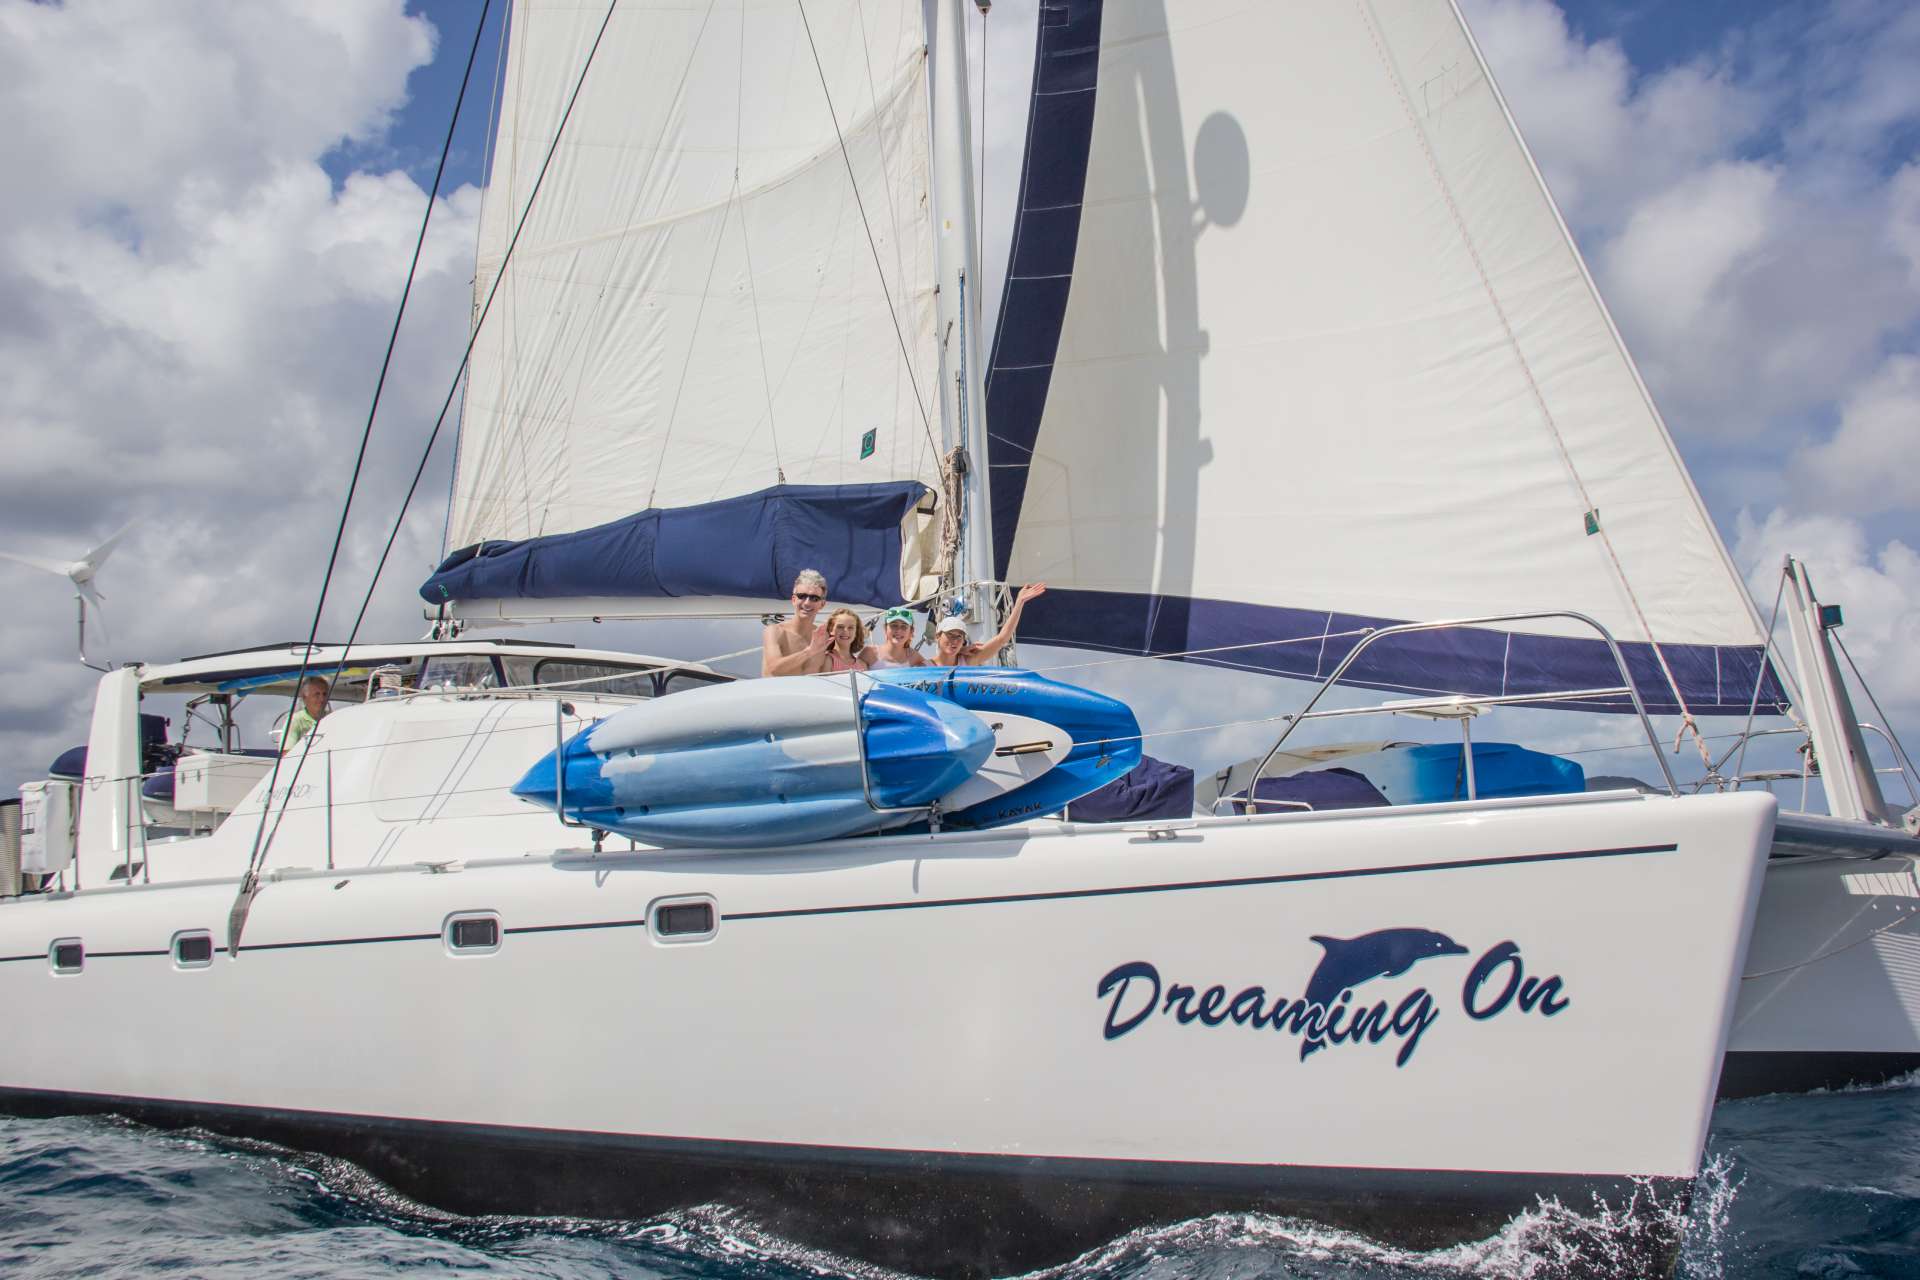 dreaming on - Catamaran Charter Saint Vincent and the Grenadines & Boat hire in Central america, Belize 2